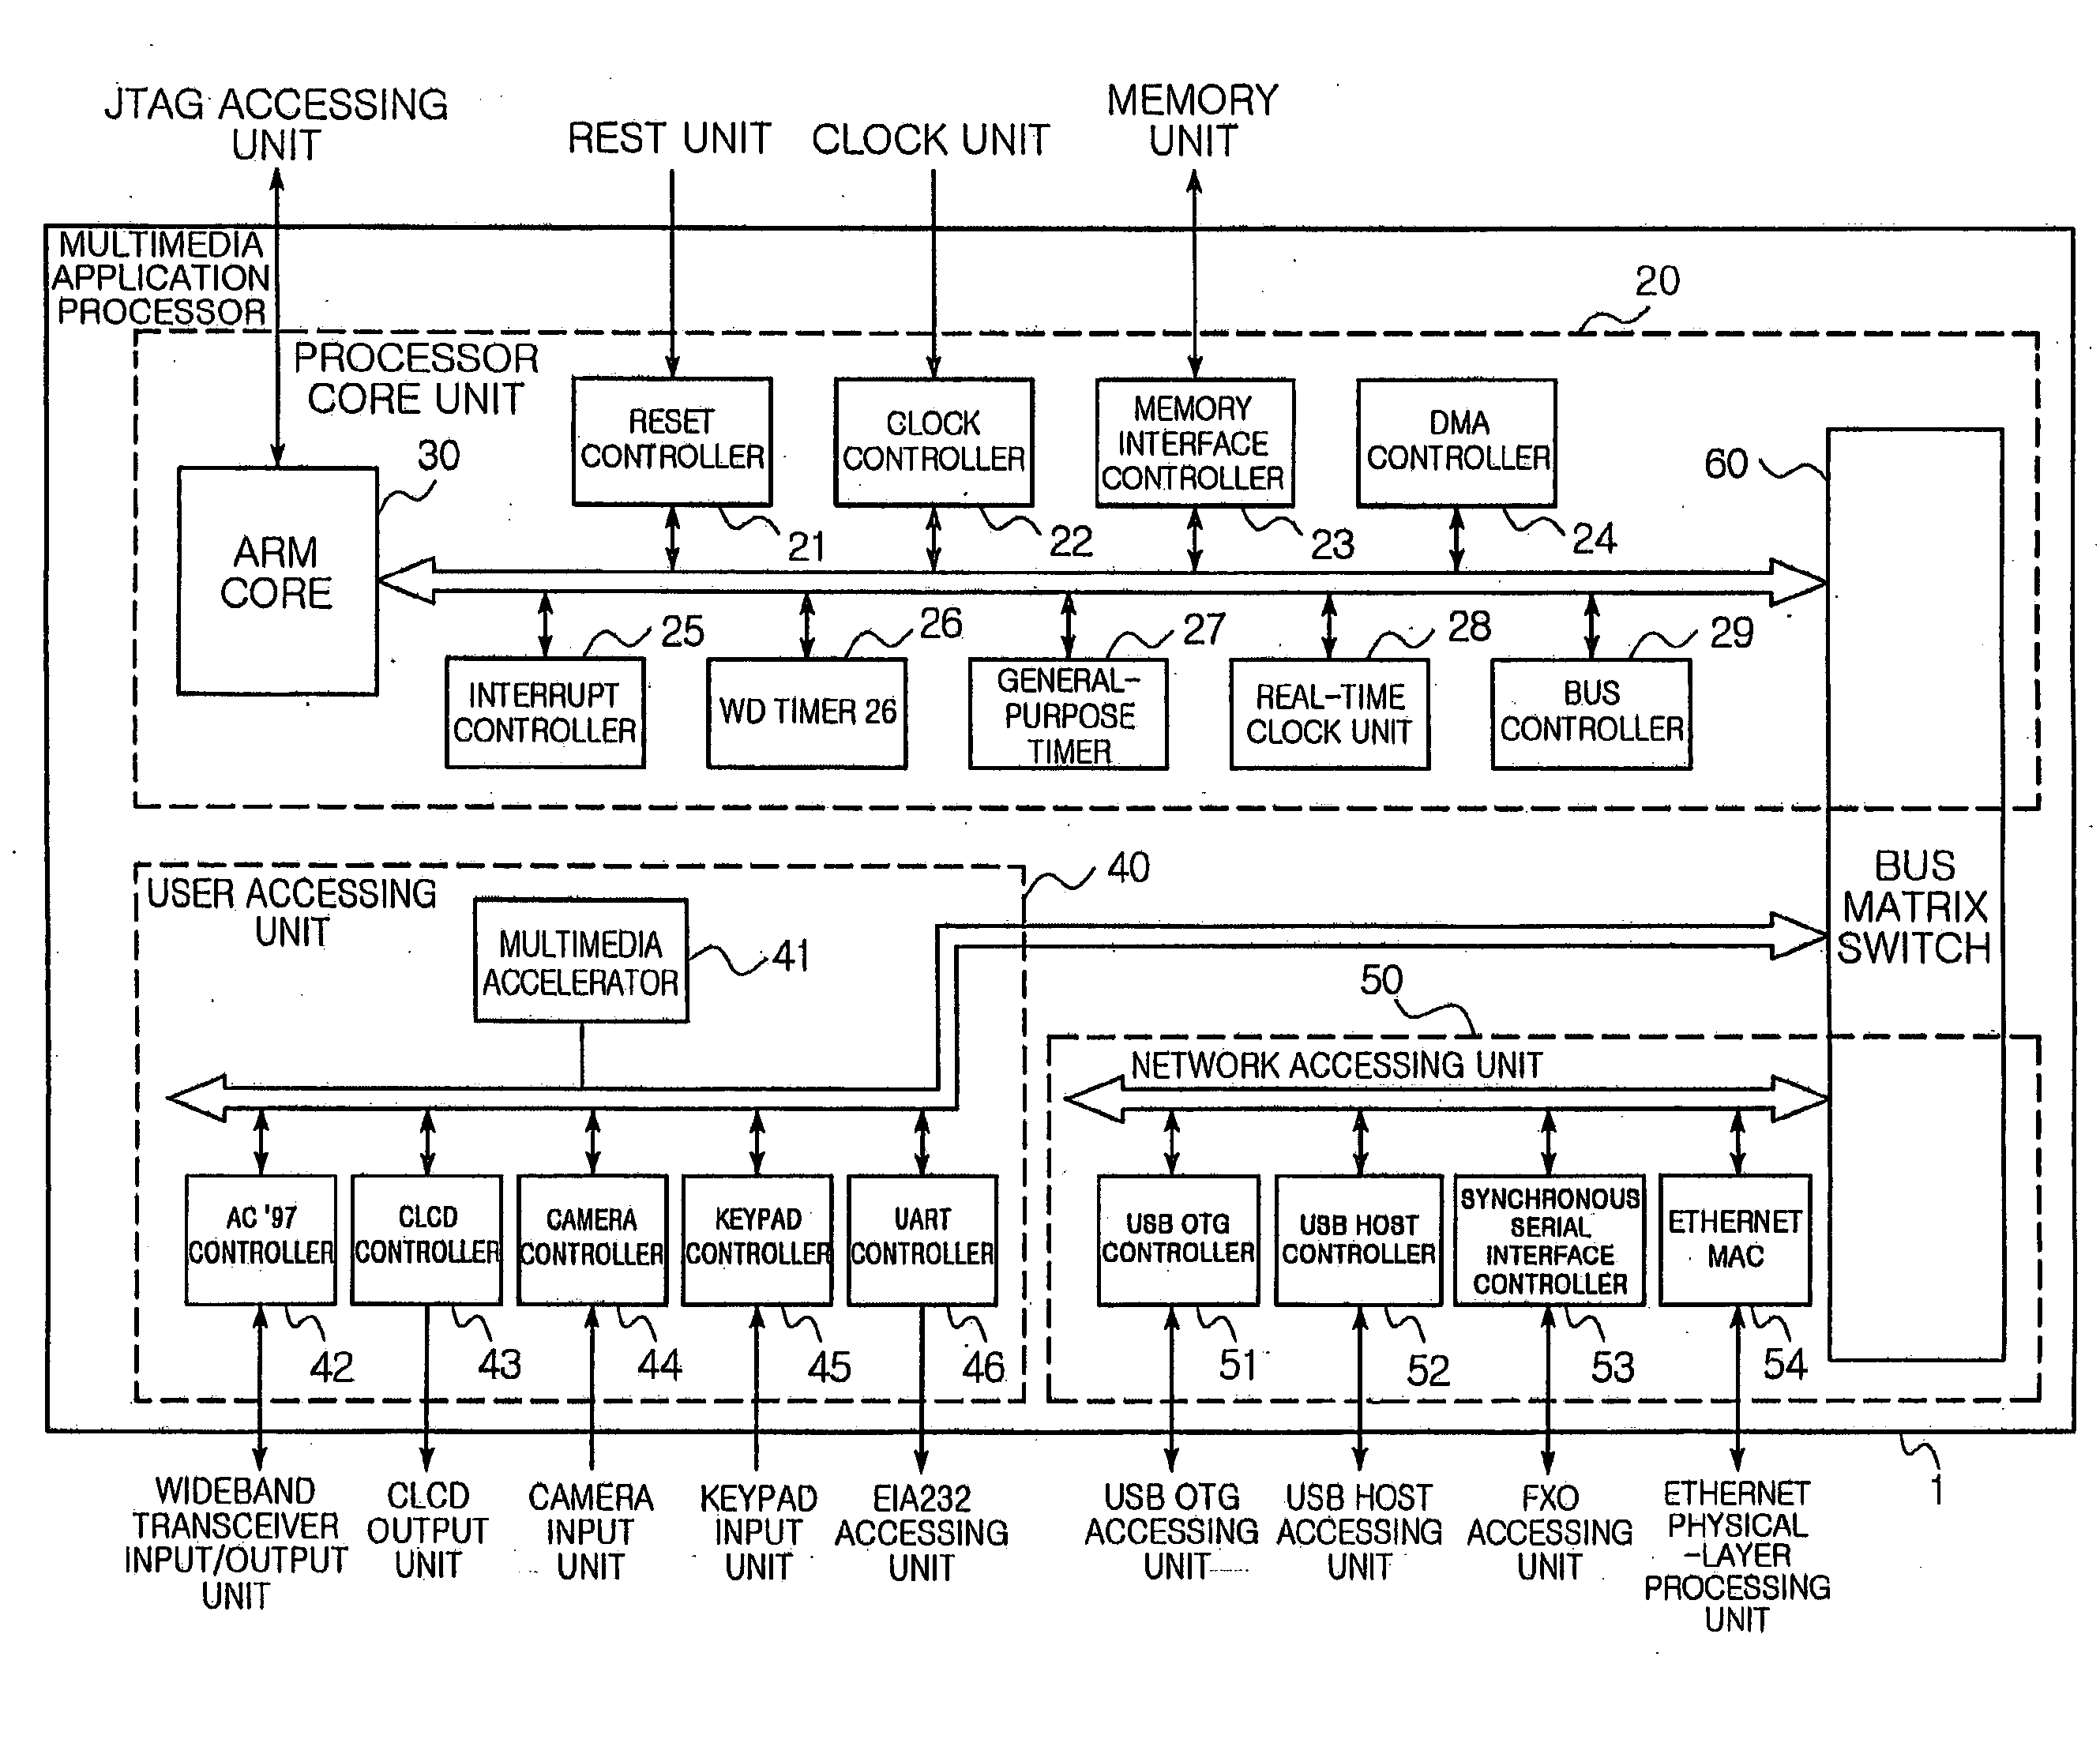 Wire and wireless internet phone terminal using wideband voice codec